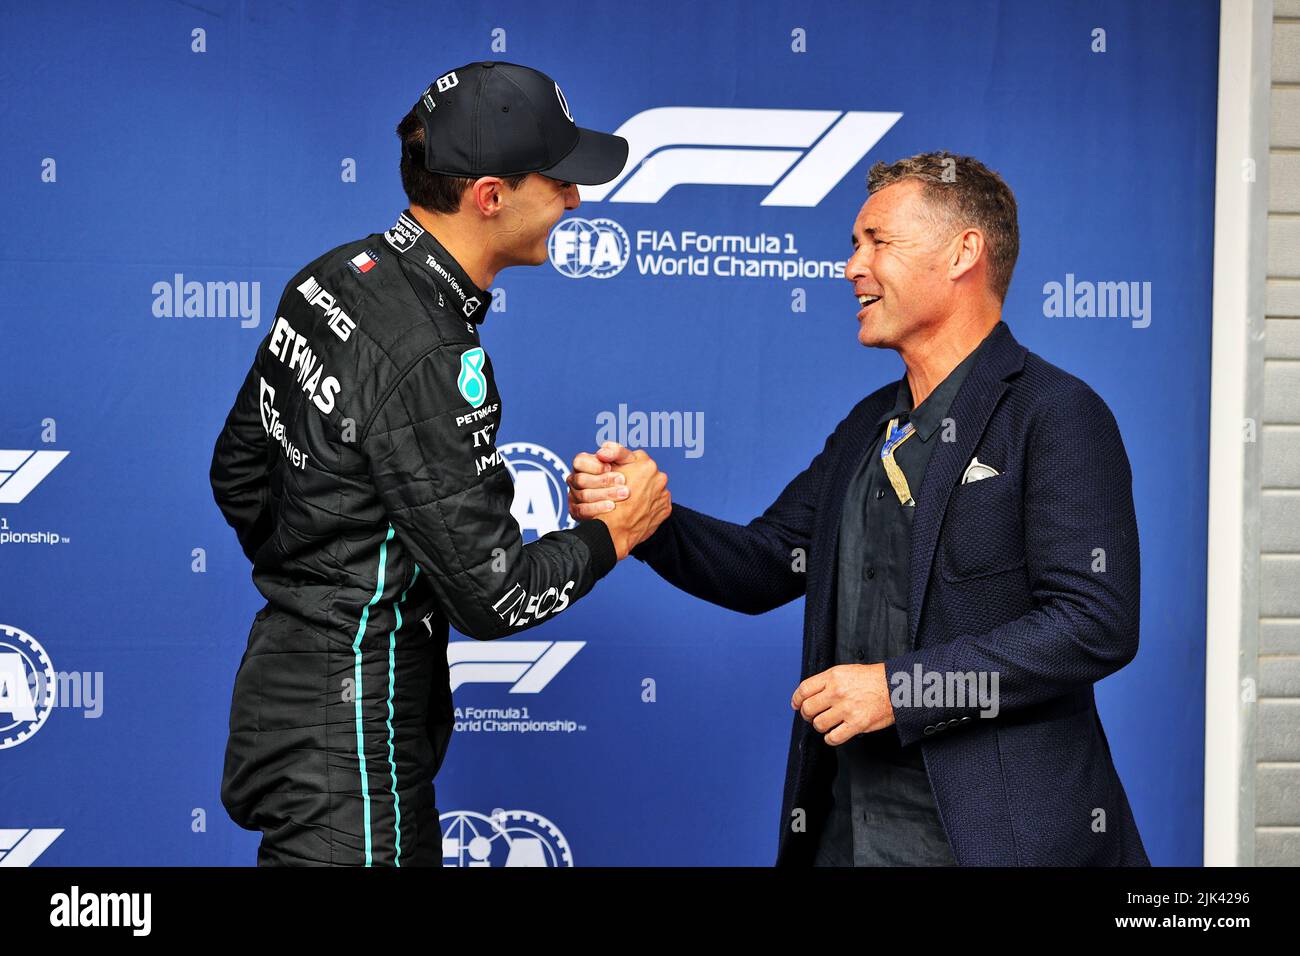 Mogyorod, Hungary. 30th July, 2022. (L to R): George Russell (GBR) Mercedes AMG F1 celebrates his pole position in qualifying parc ferme with Tom Kristensen (DEN). Hungarian Grand Prix, Saturday 30th July 2022. Budapest, Hungary. Credit: James Moy/Alamy Live News Stock Photo